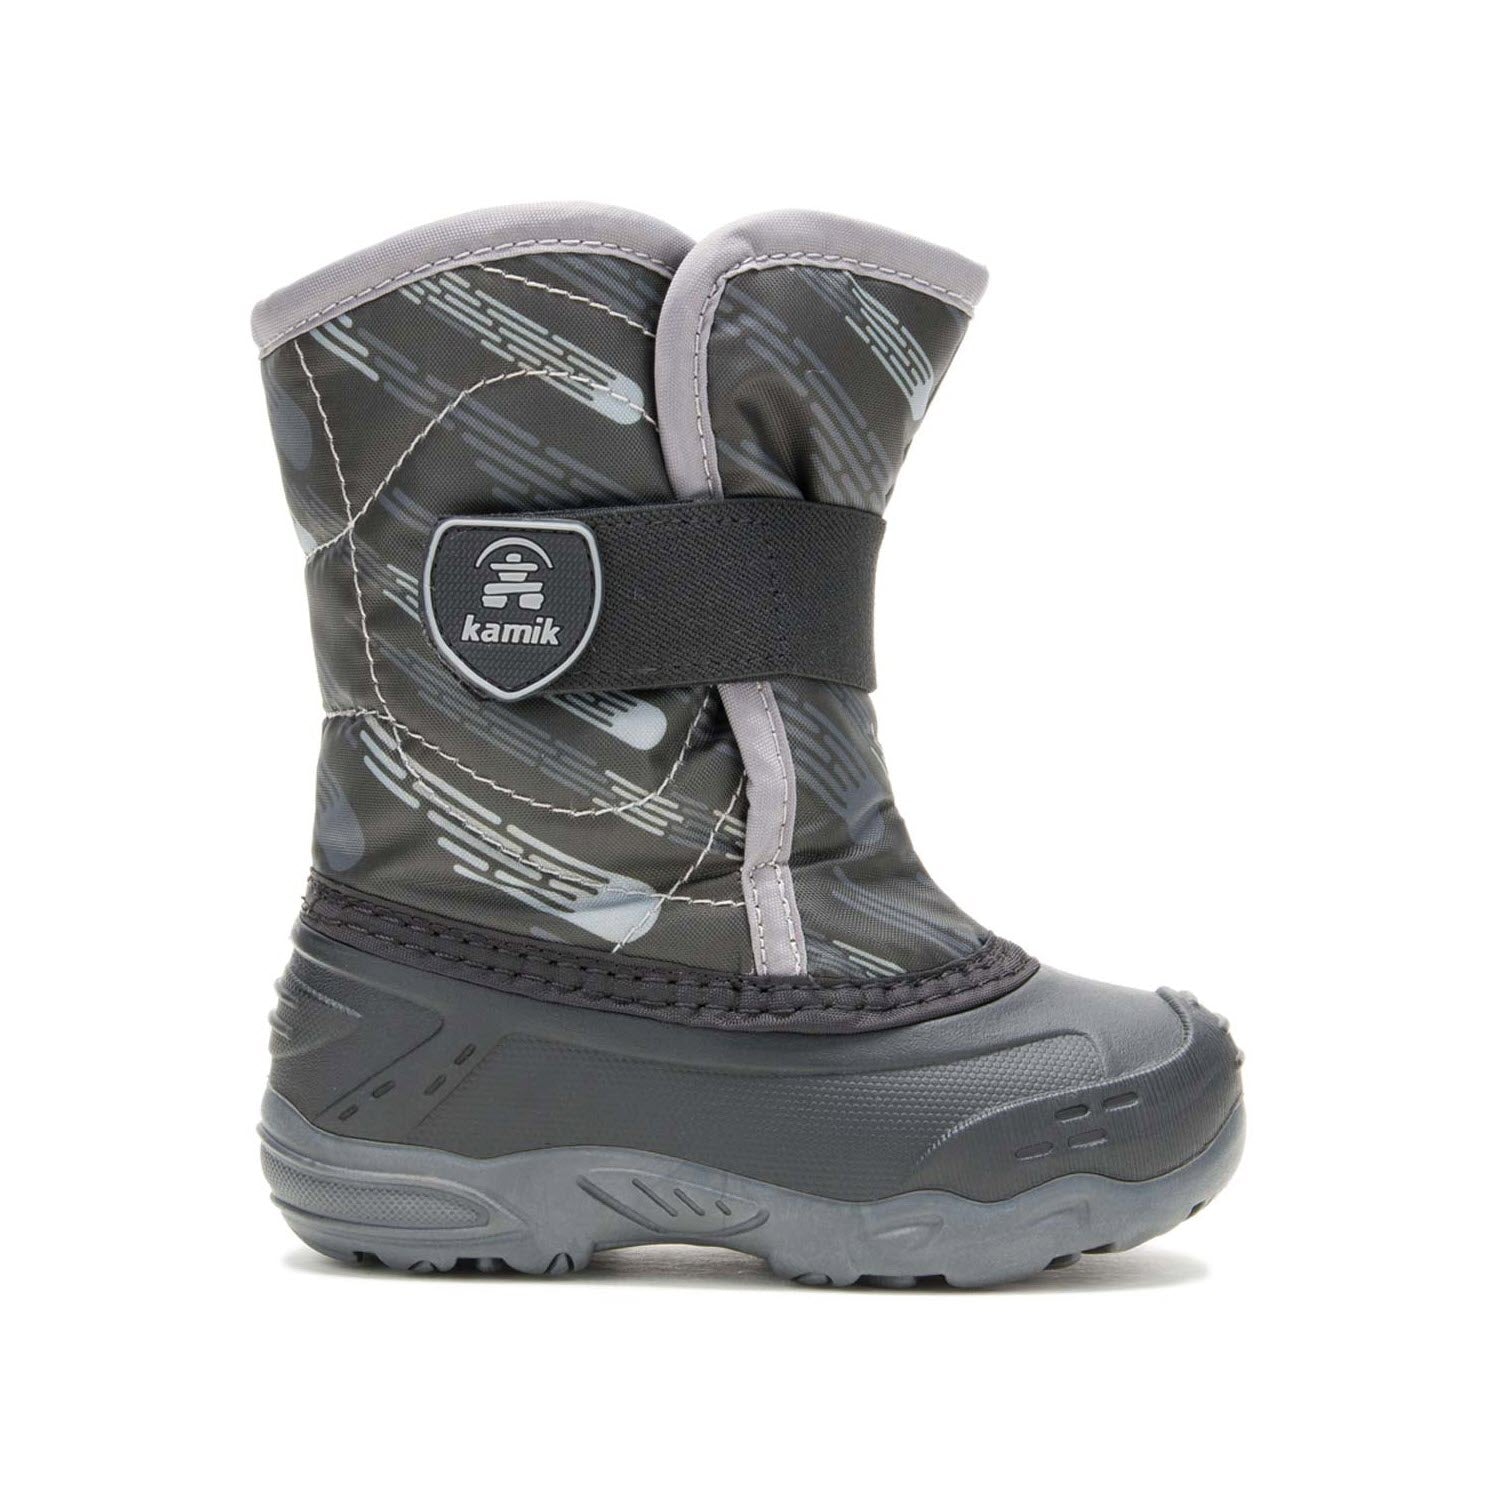 Child's Kamik Snowbug 6 Black/Grey - Kids winter boot with a patterned upper, a velcro strap, and thick treaded sole, isolated on a white background.